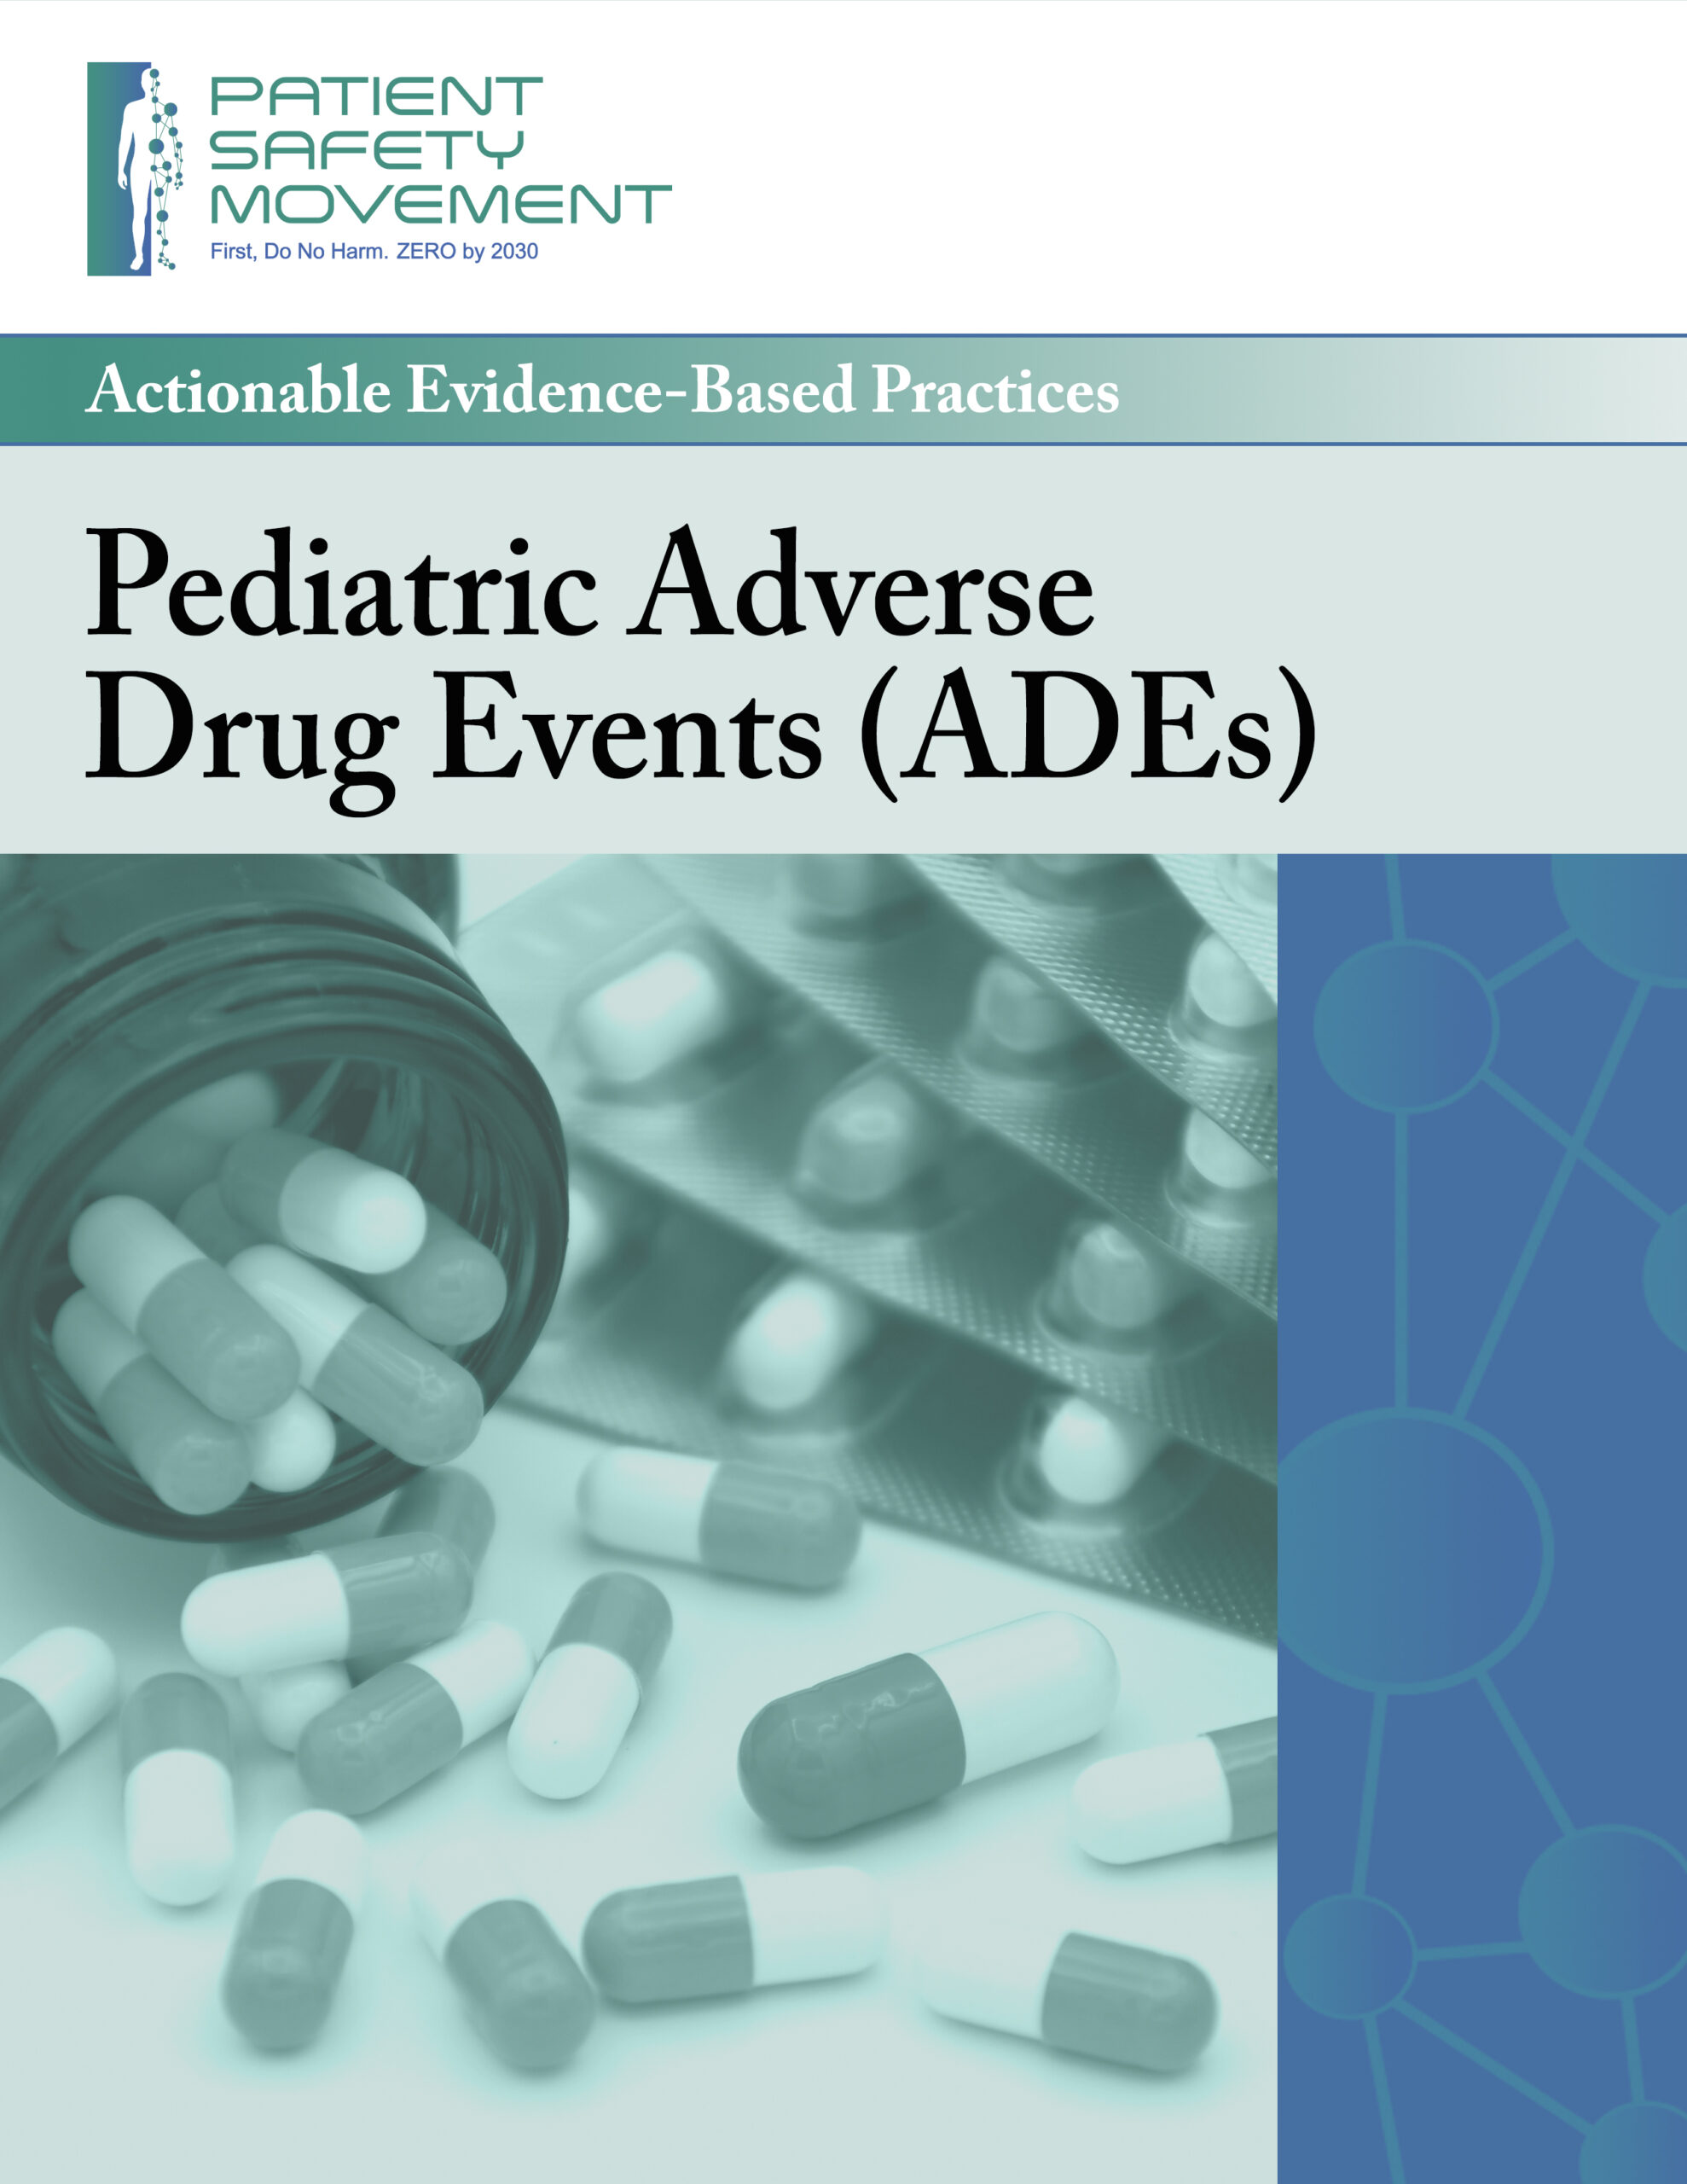 pediatric adverse drug events cover 2d scaled